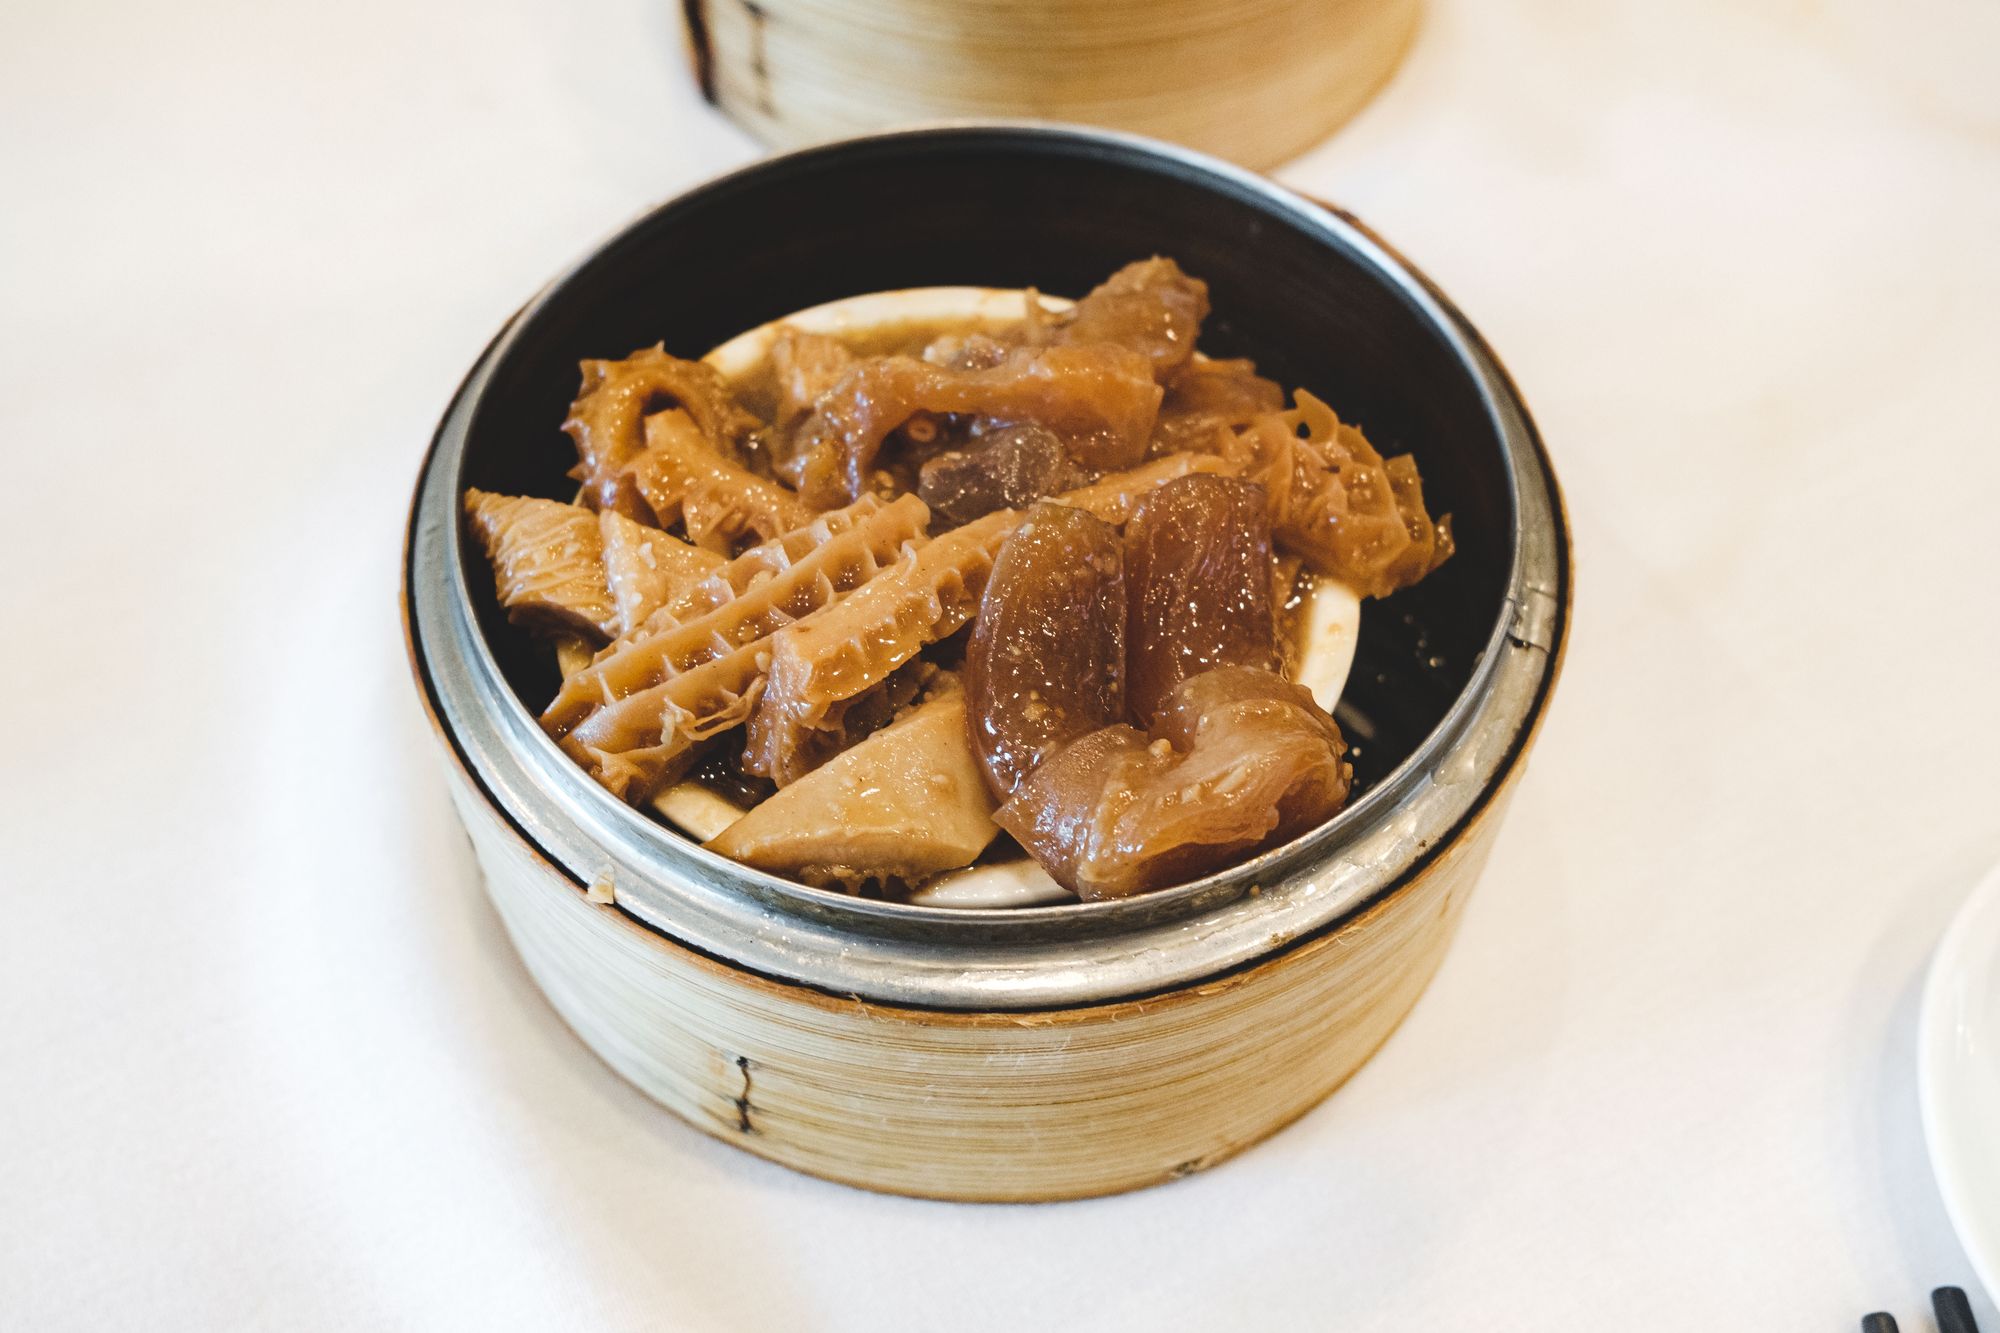 Sun Sui Wah – Beef Tendon and Tripe in Special Sauce